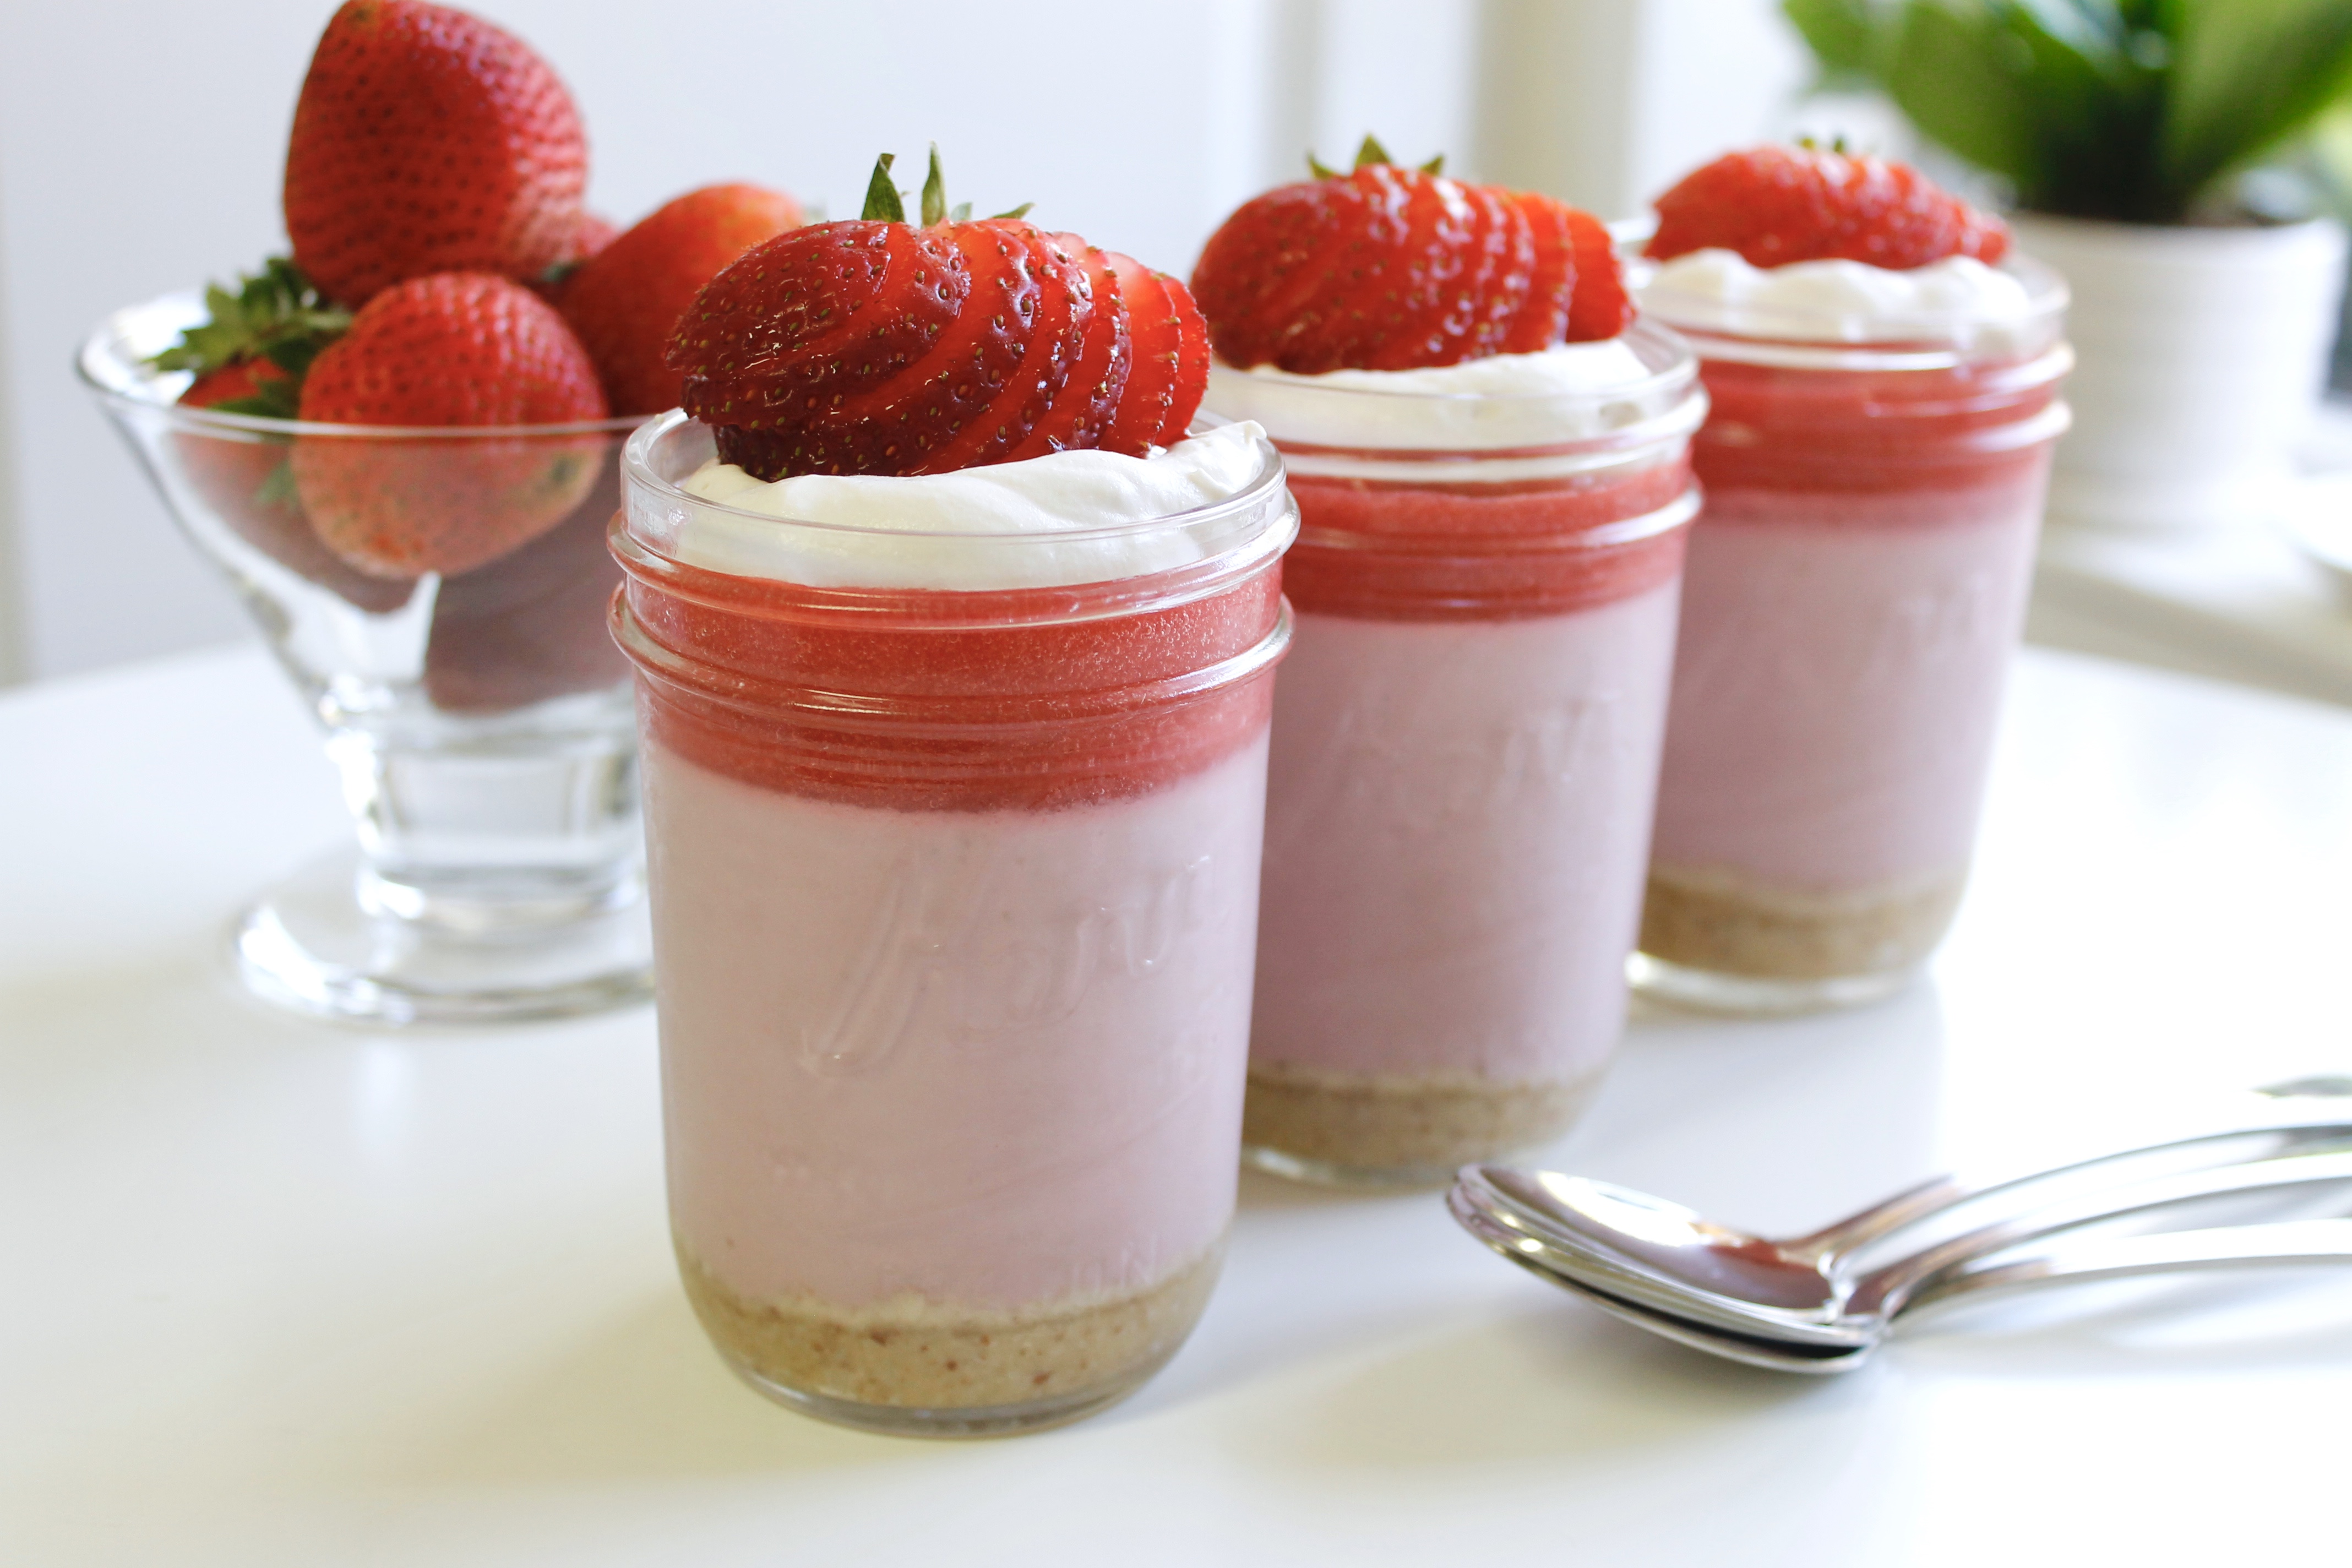 GF and Dairy Free Strawberry "Mousse" Jars